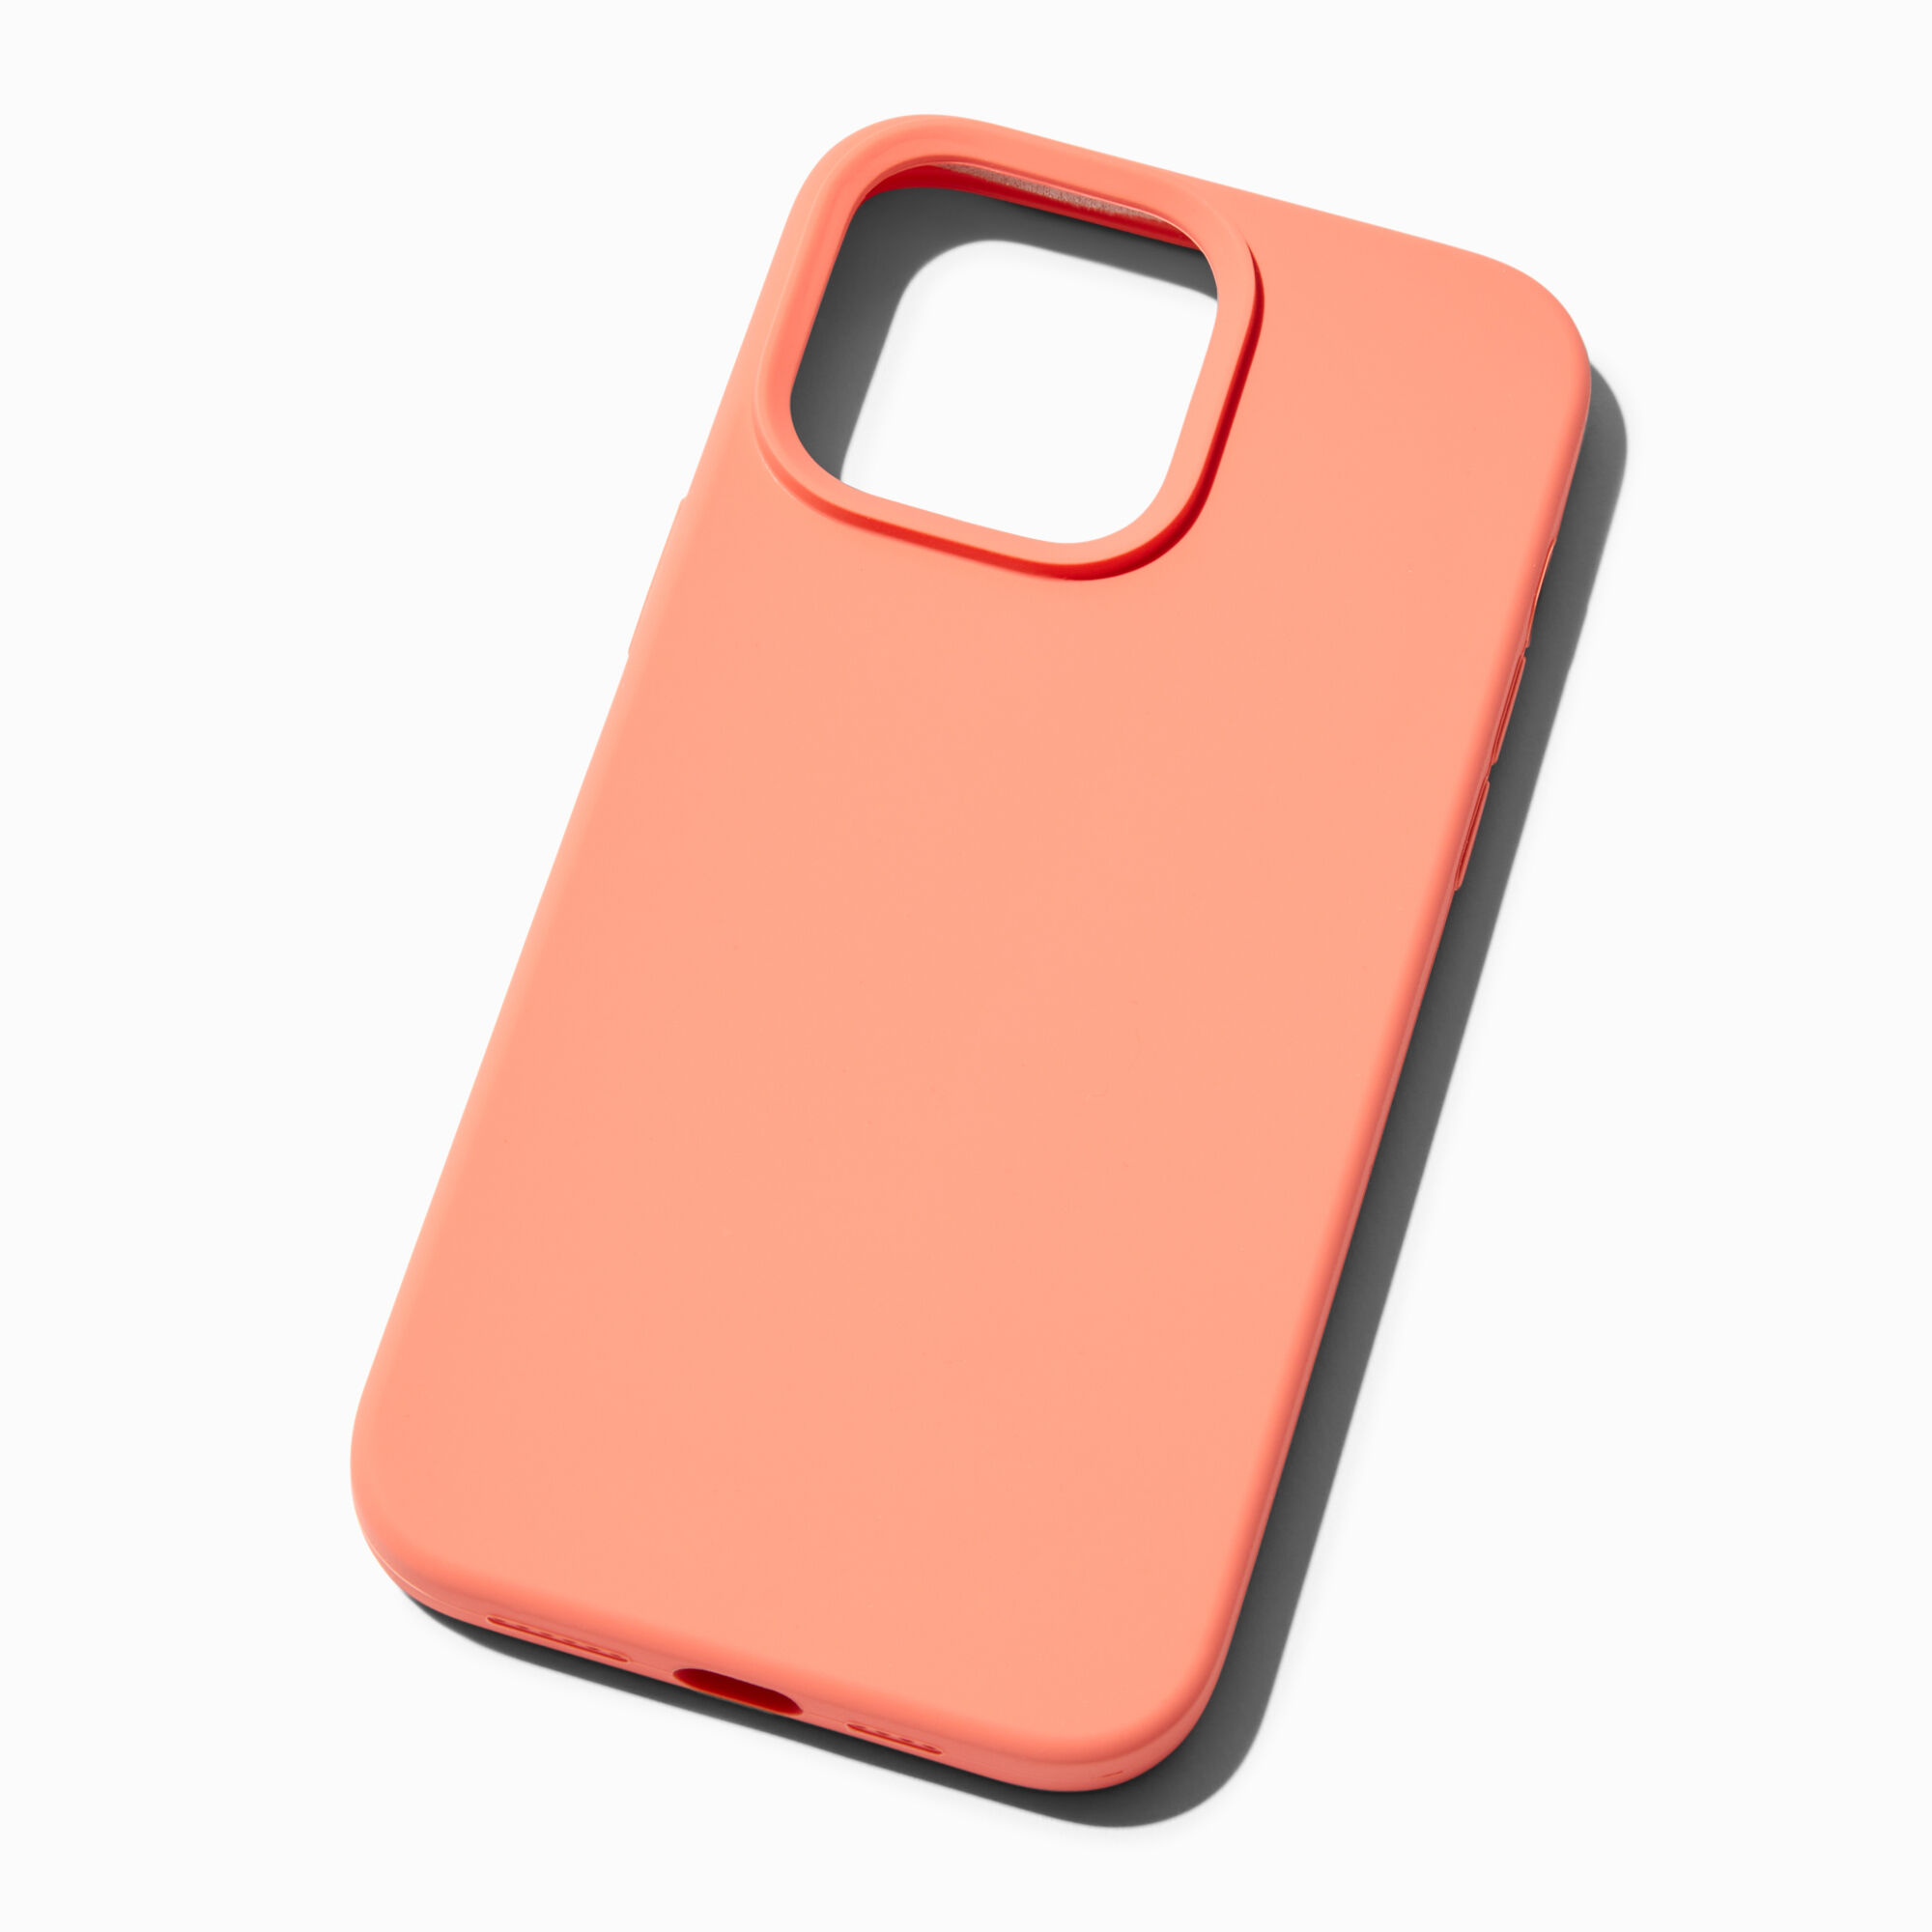 View Claires Solid Silicone Phone Case Fits Iphone 14 Pro Max Coral information